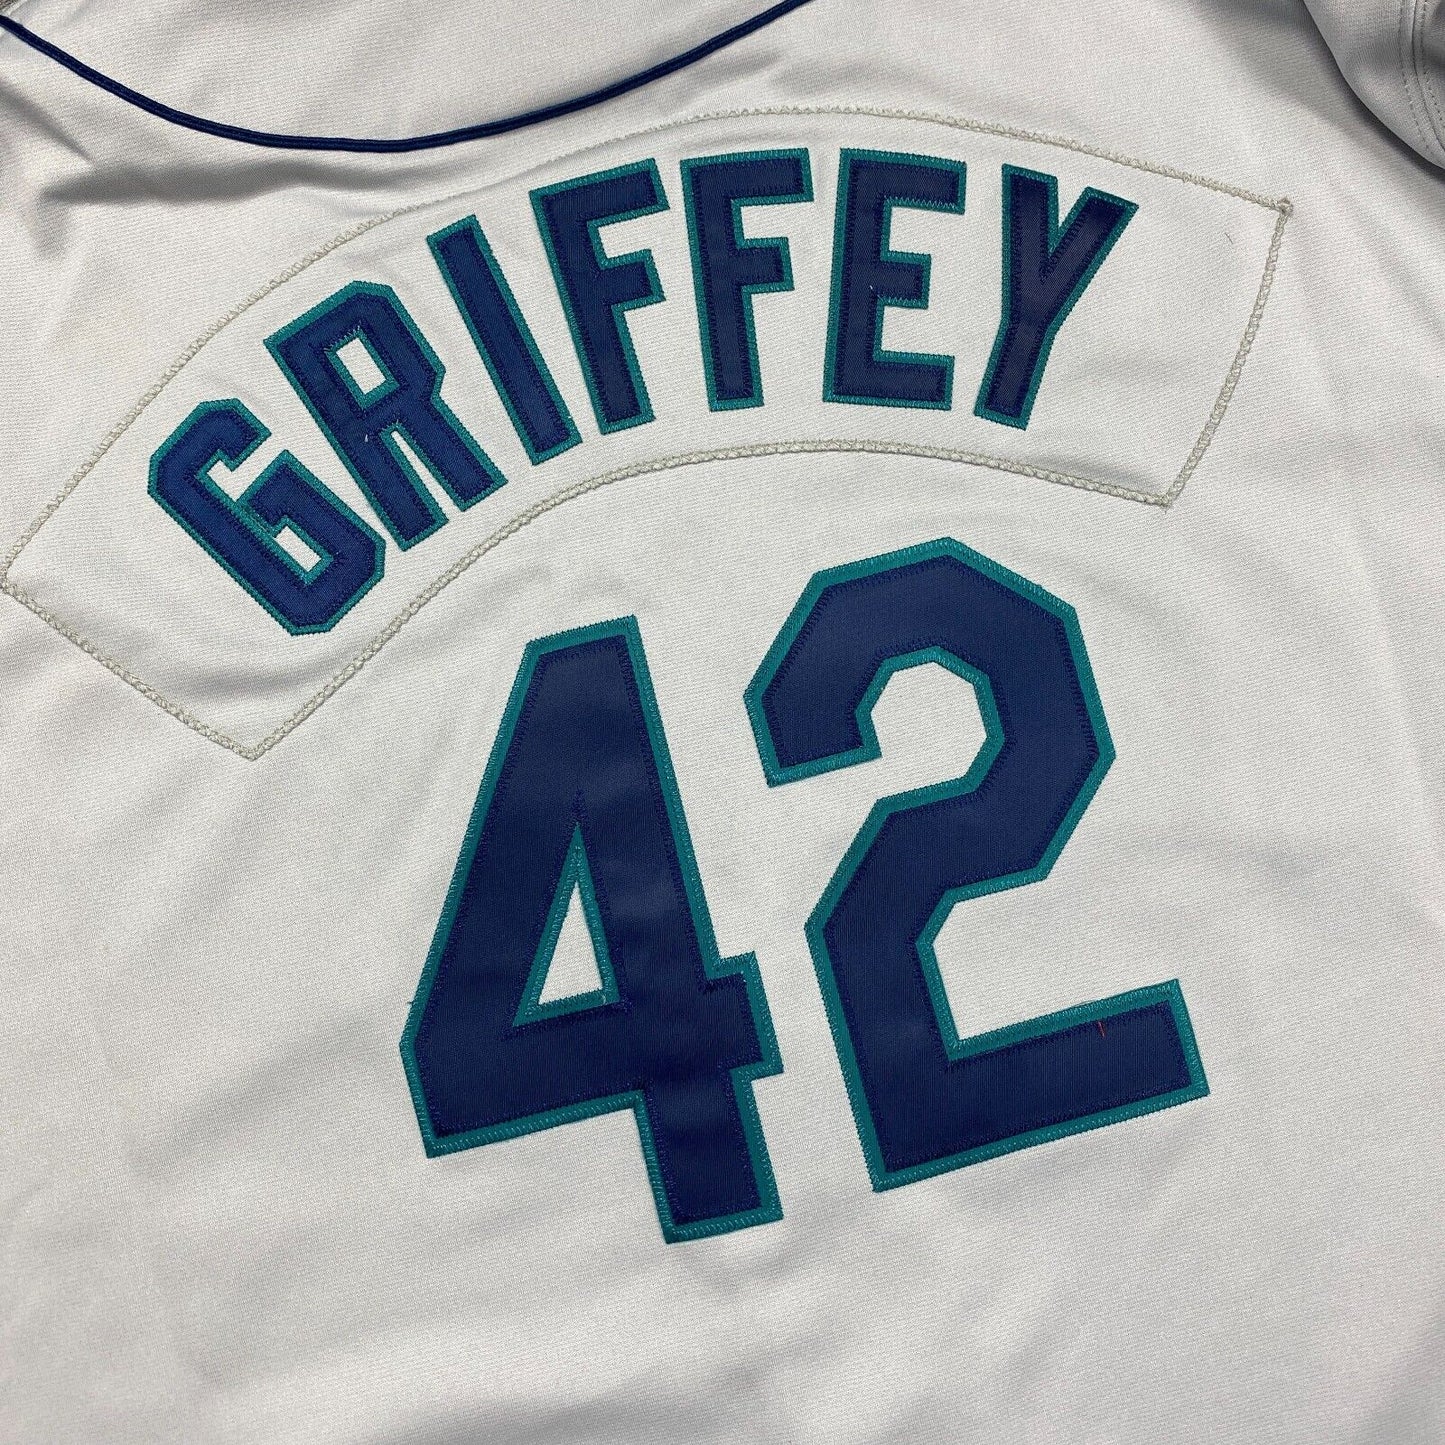 100% Authentic Ken Griffey Jr Mitchell & Ness 1997 Mariners Jersey Size 52 2XL